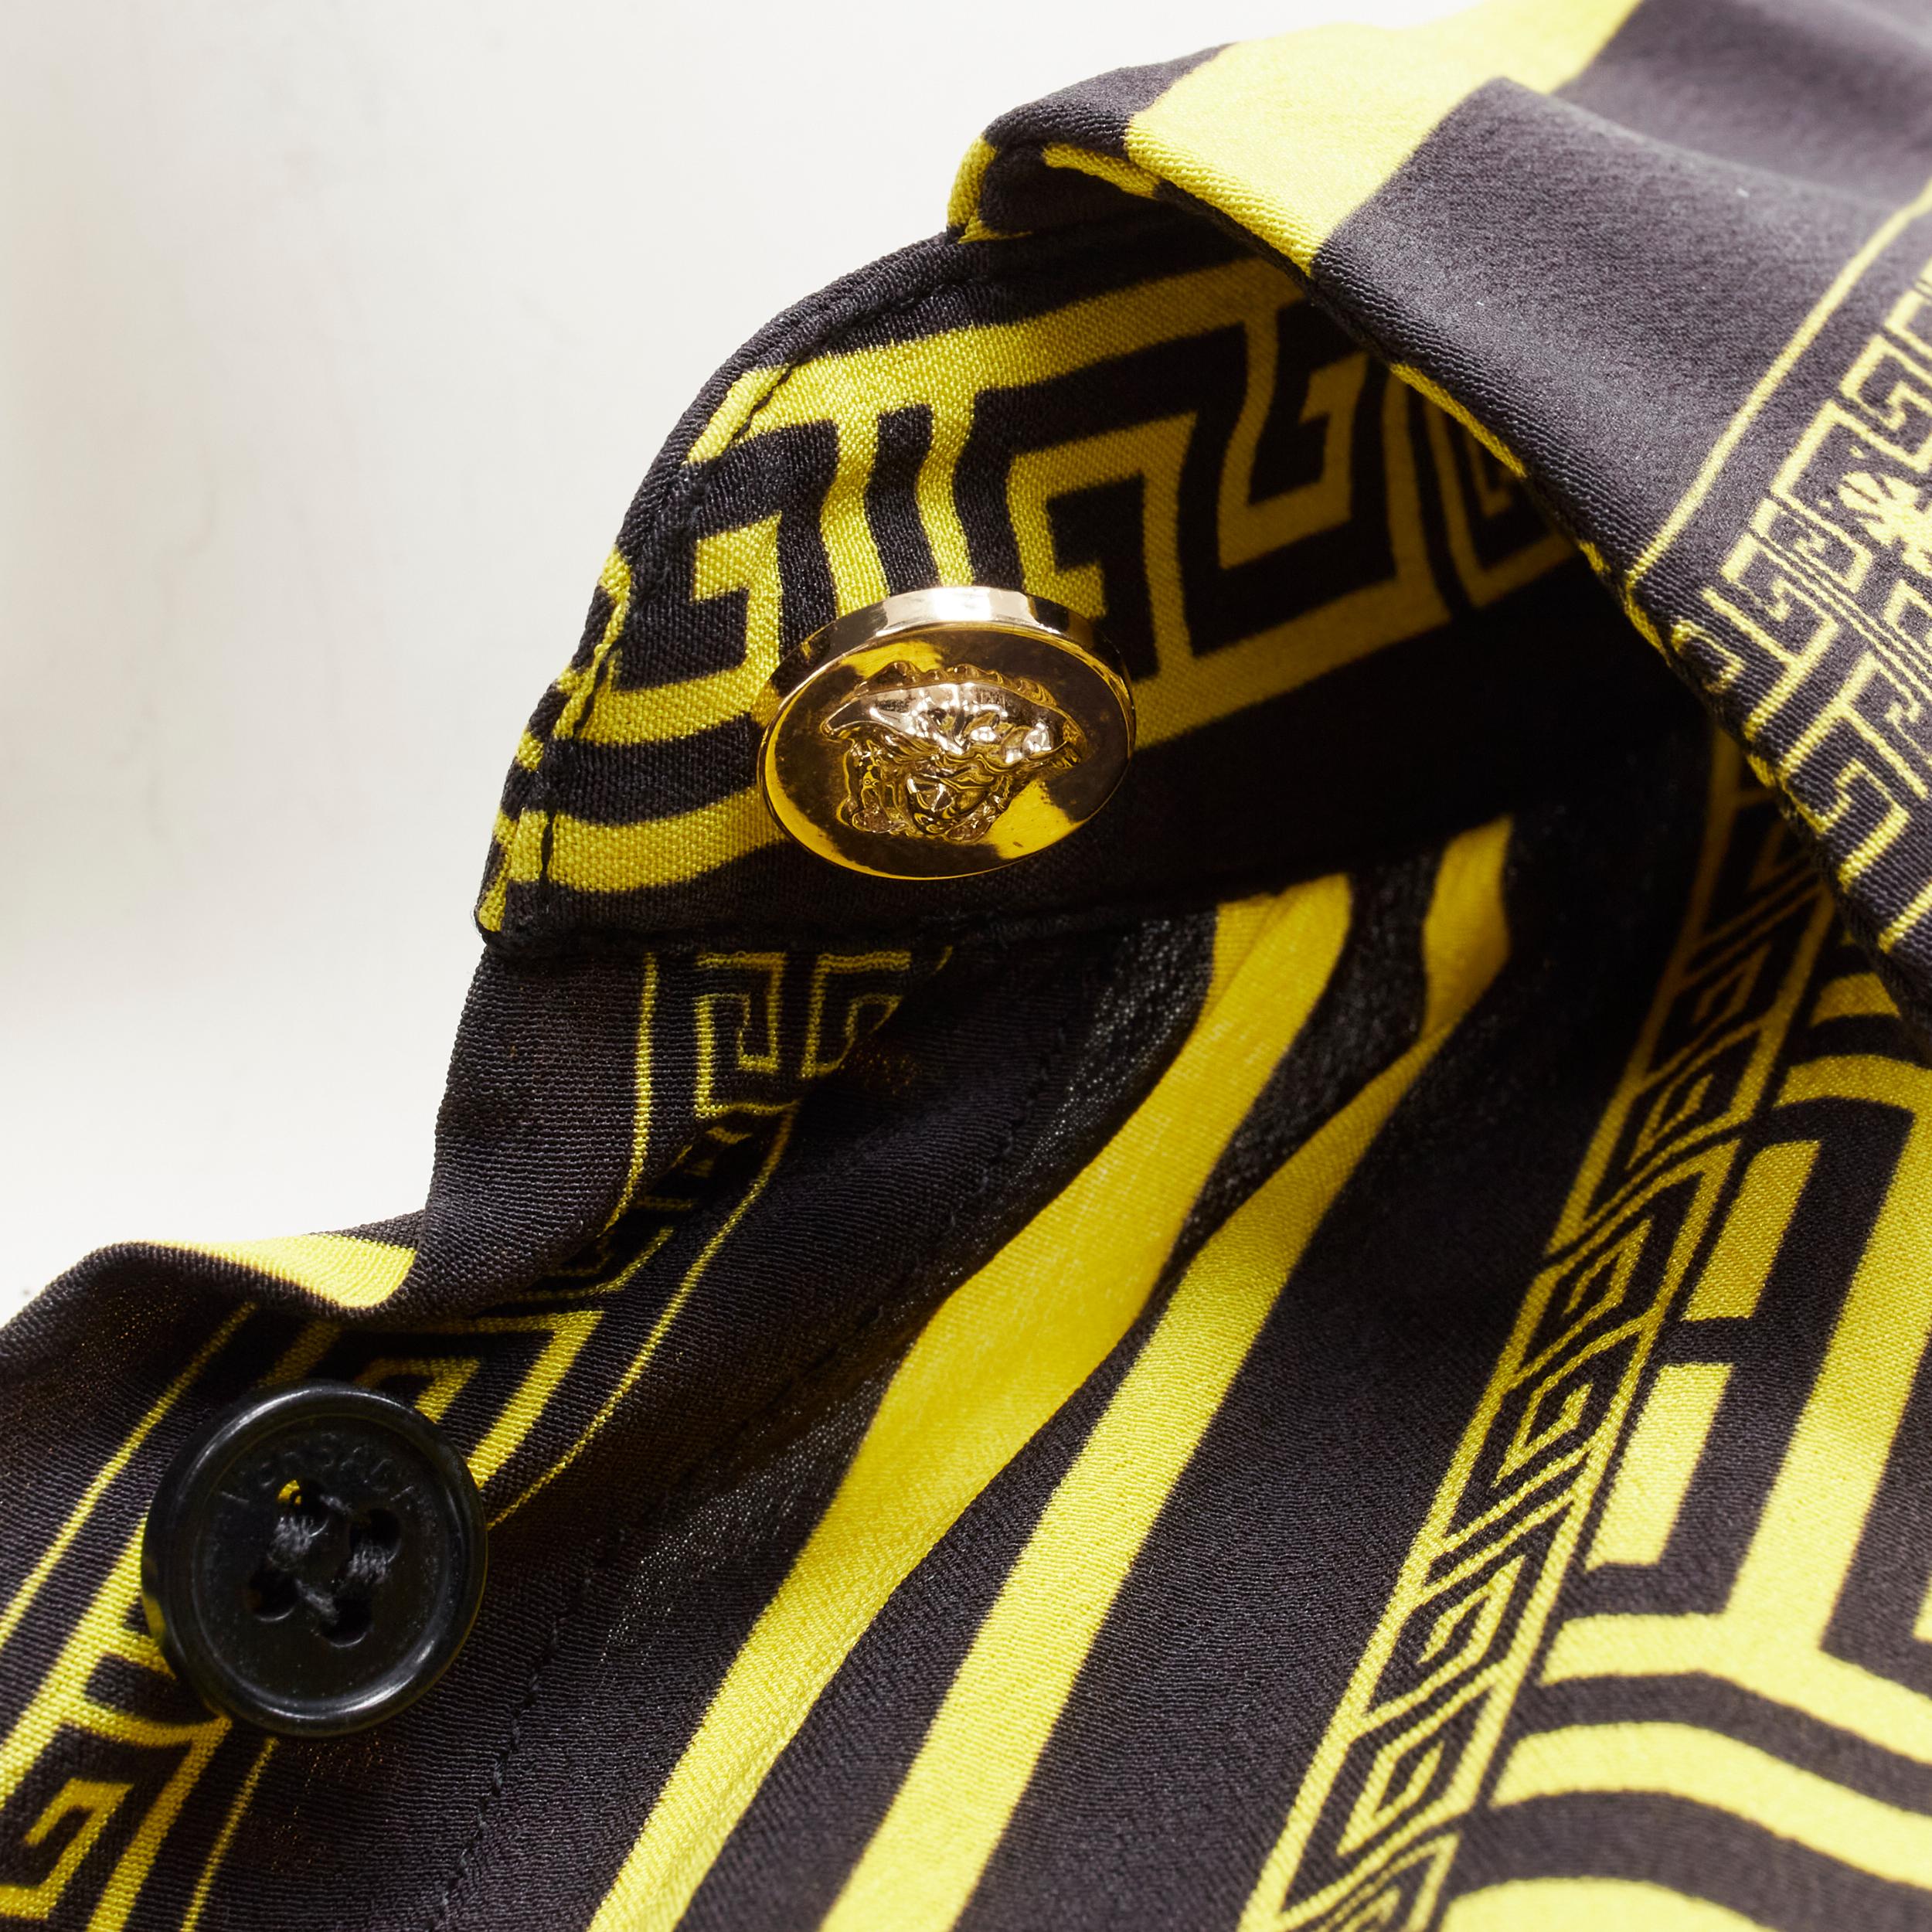 VERSACE 100% silk black gold Greca print Medusa button slim fit shirt IT38 XS 
Reference: TGAS/B01718 
Brand: Versace 
Material: Silk 
Color: Yellow 
Pattern: Geometric 
Closure: Button 
Extra Detail: Gold-tone Medusa button at cuff and collar. Slim